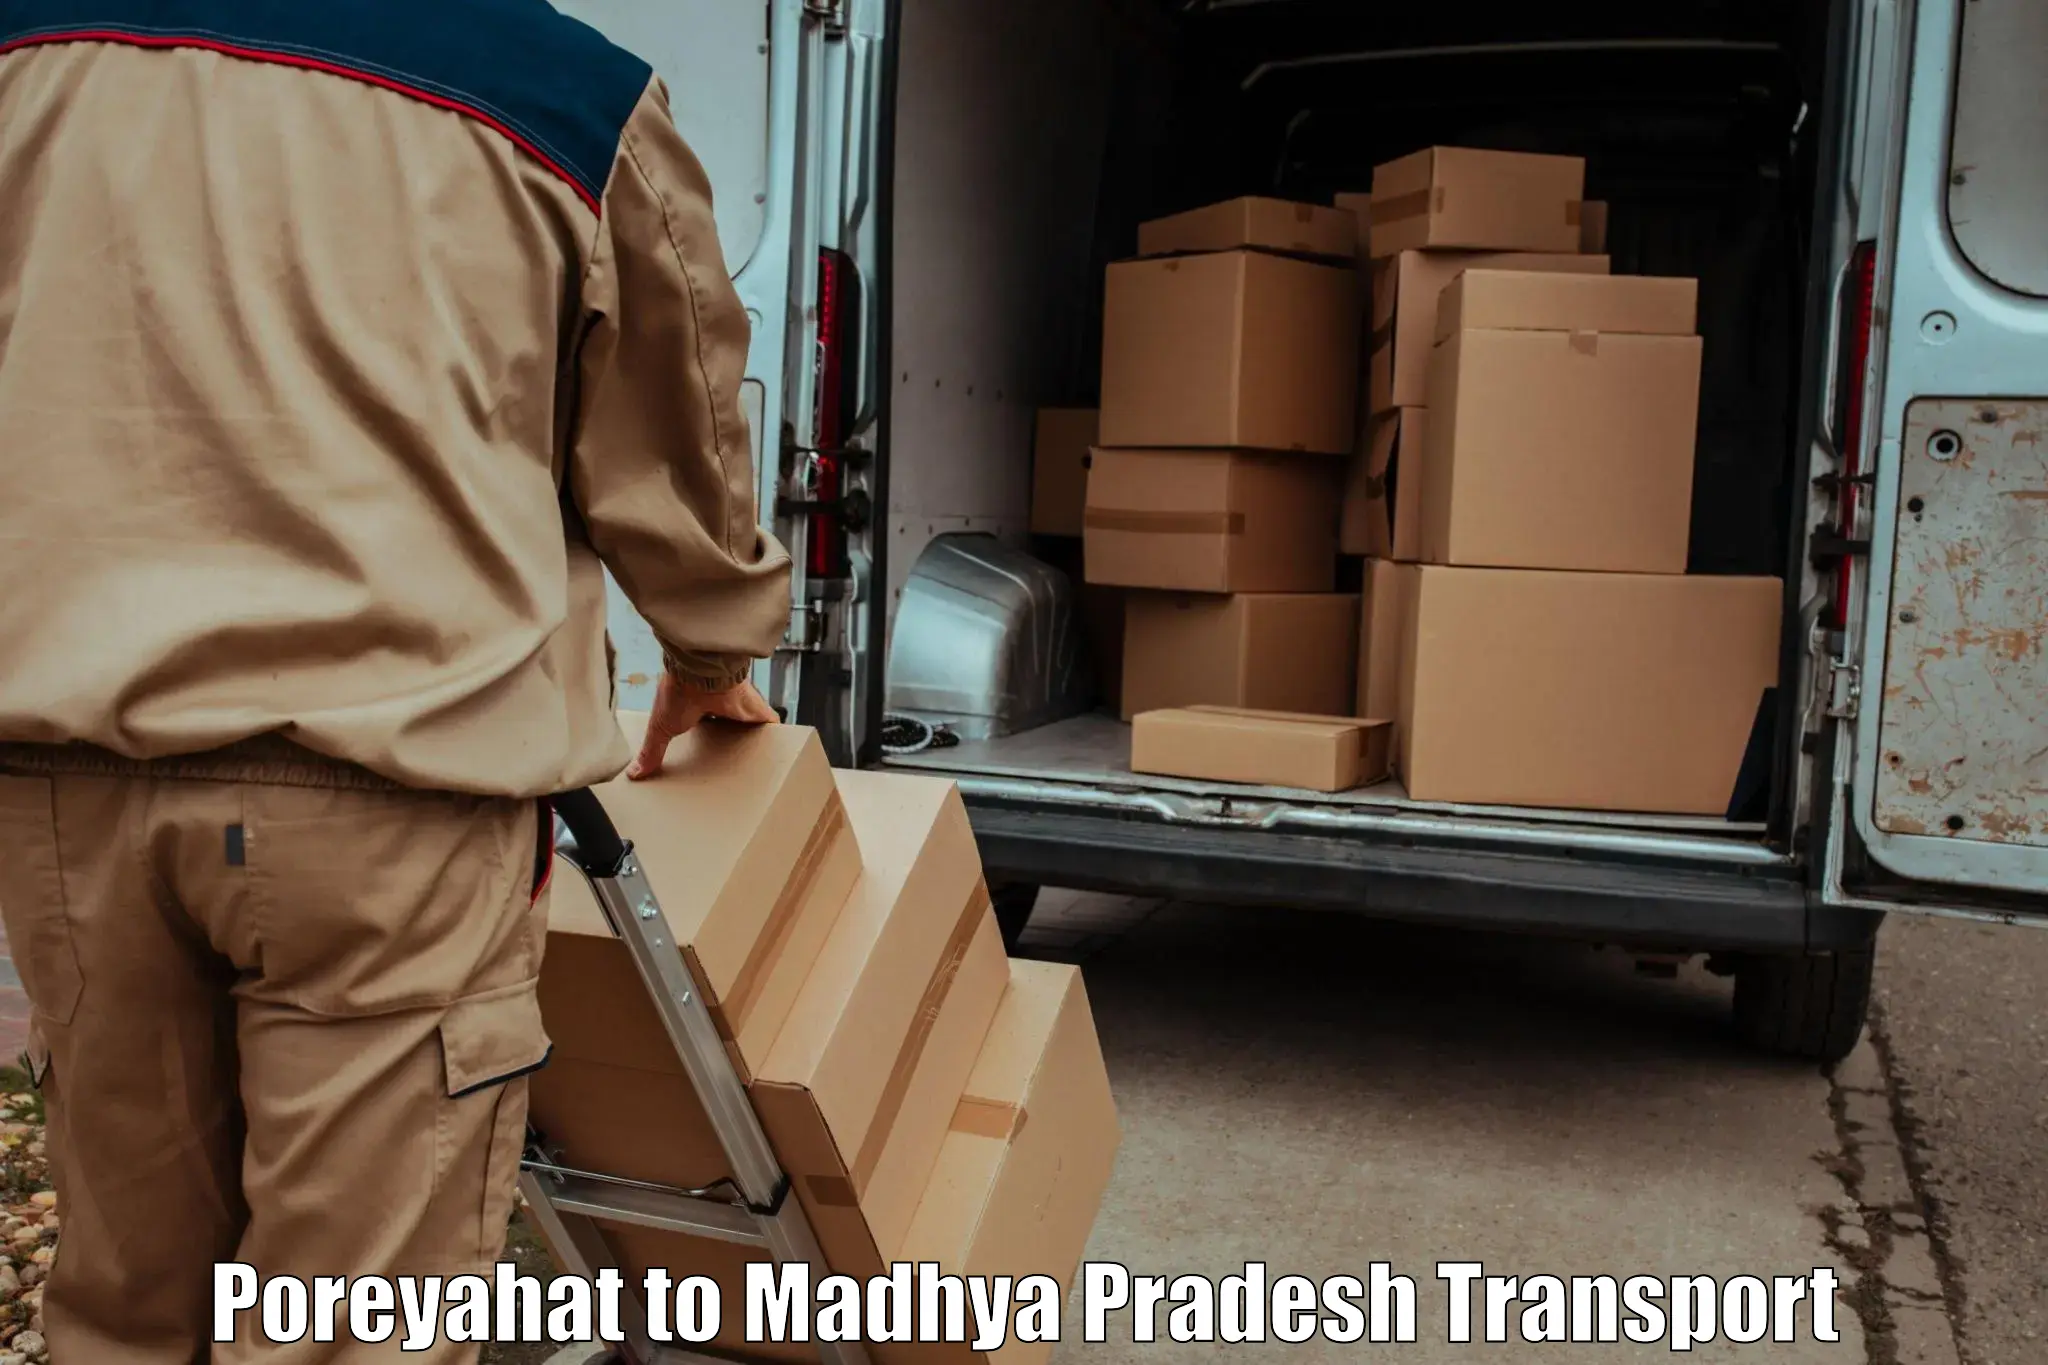 Land transport services in Poreyahat to Shivpuri